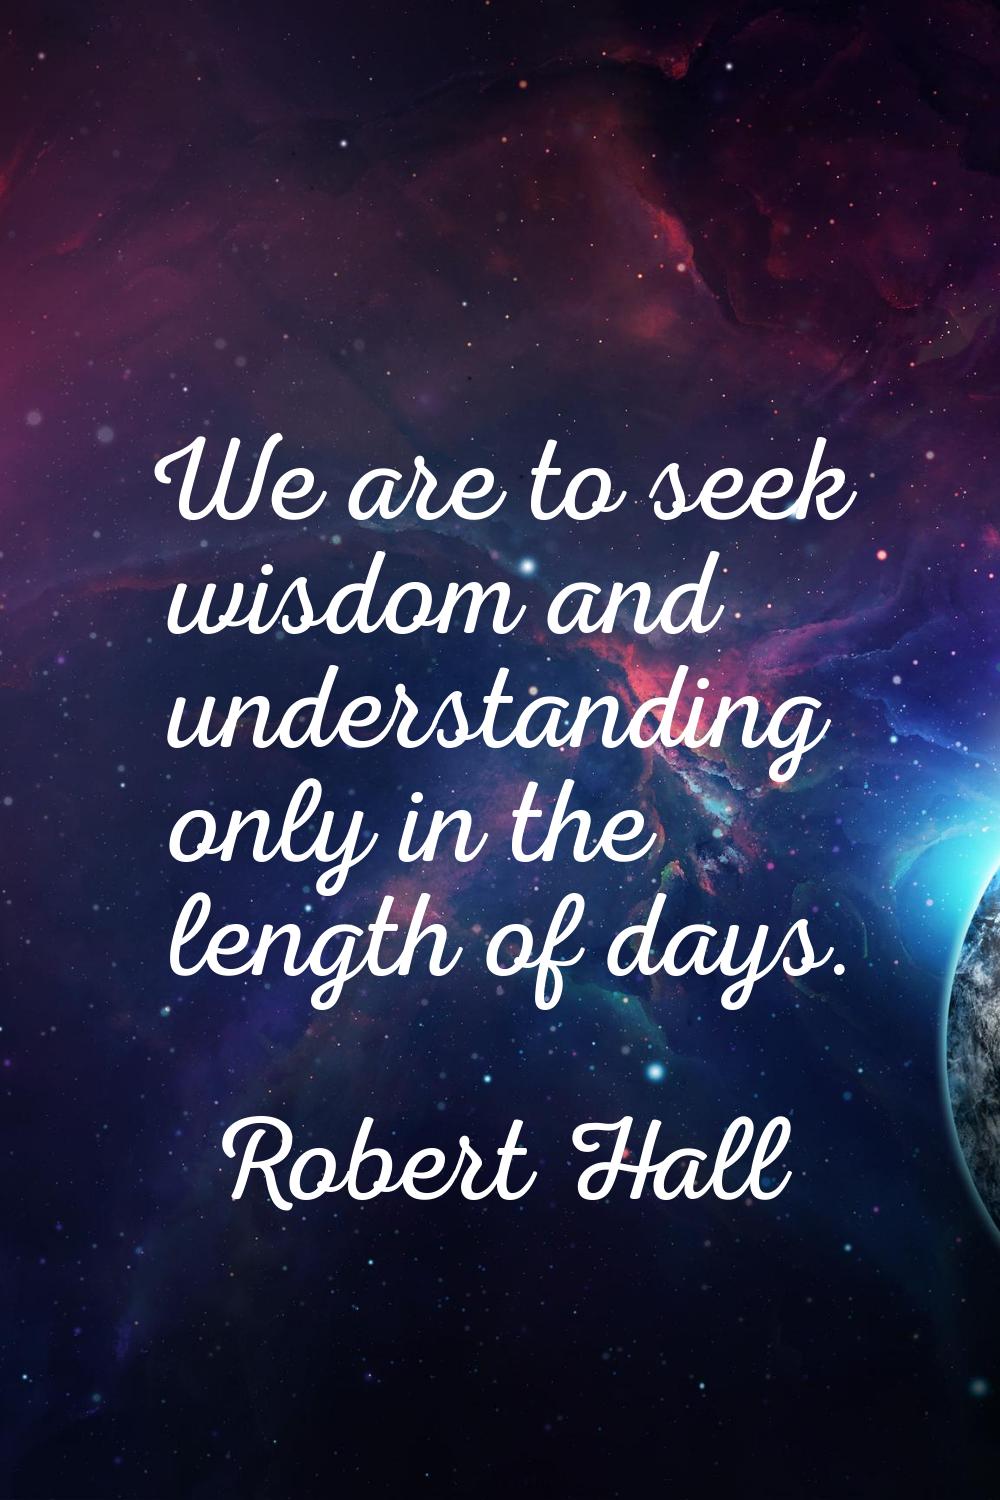 We are to seek wisdom and understanding only in the length of days.